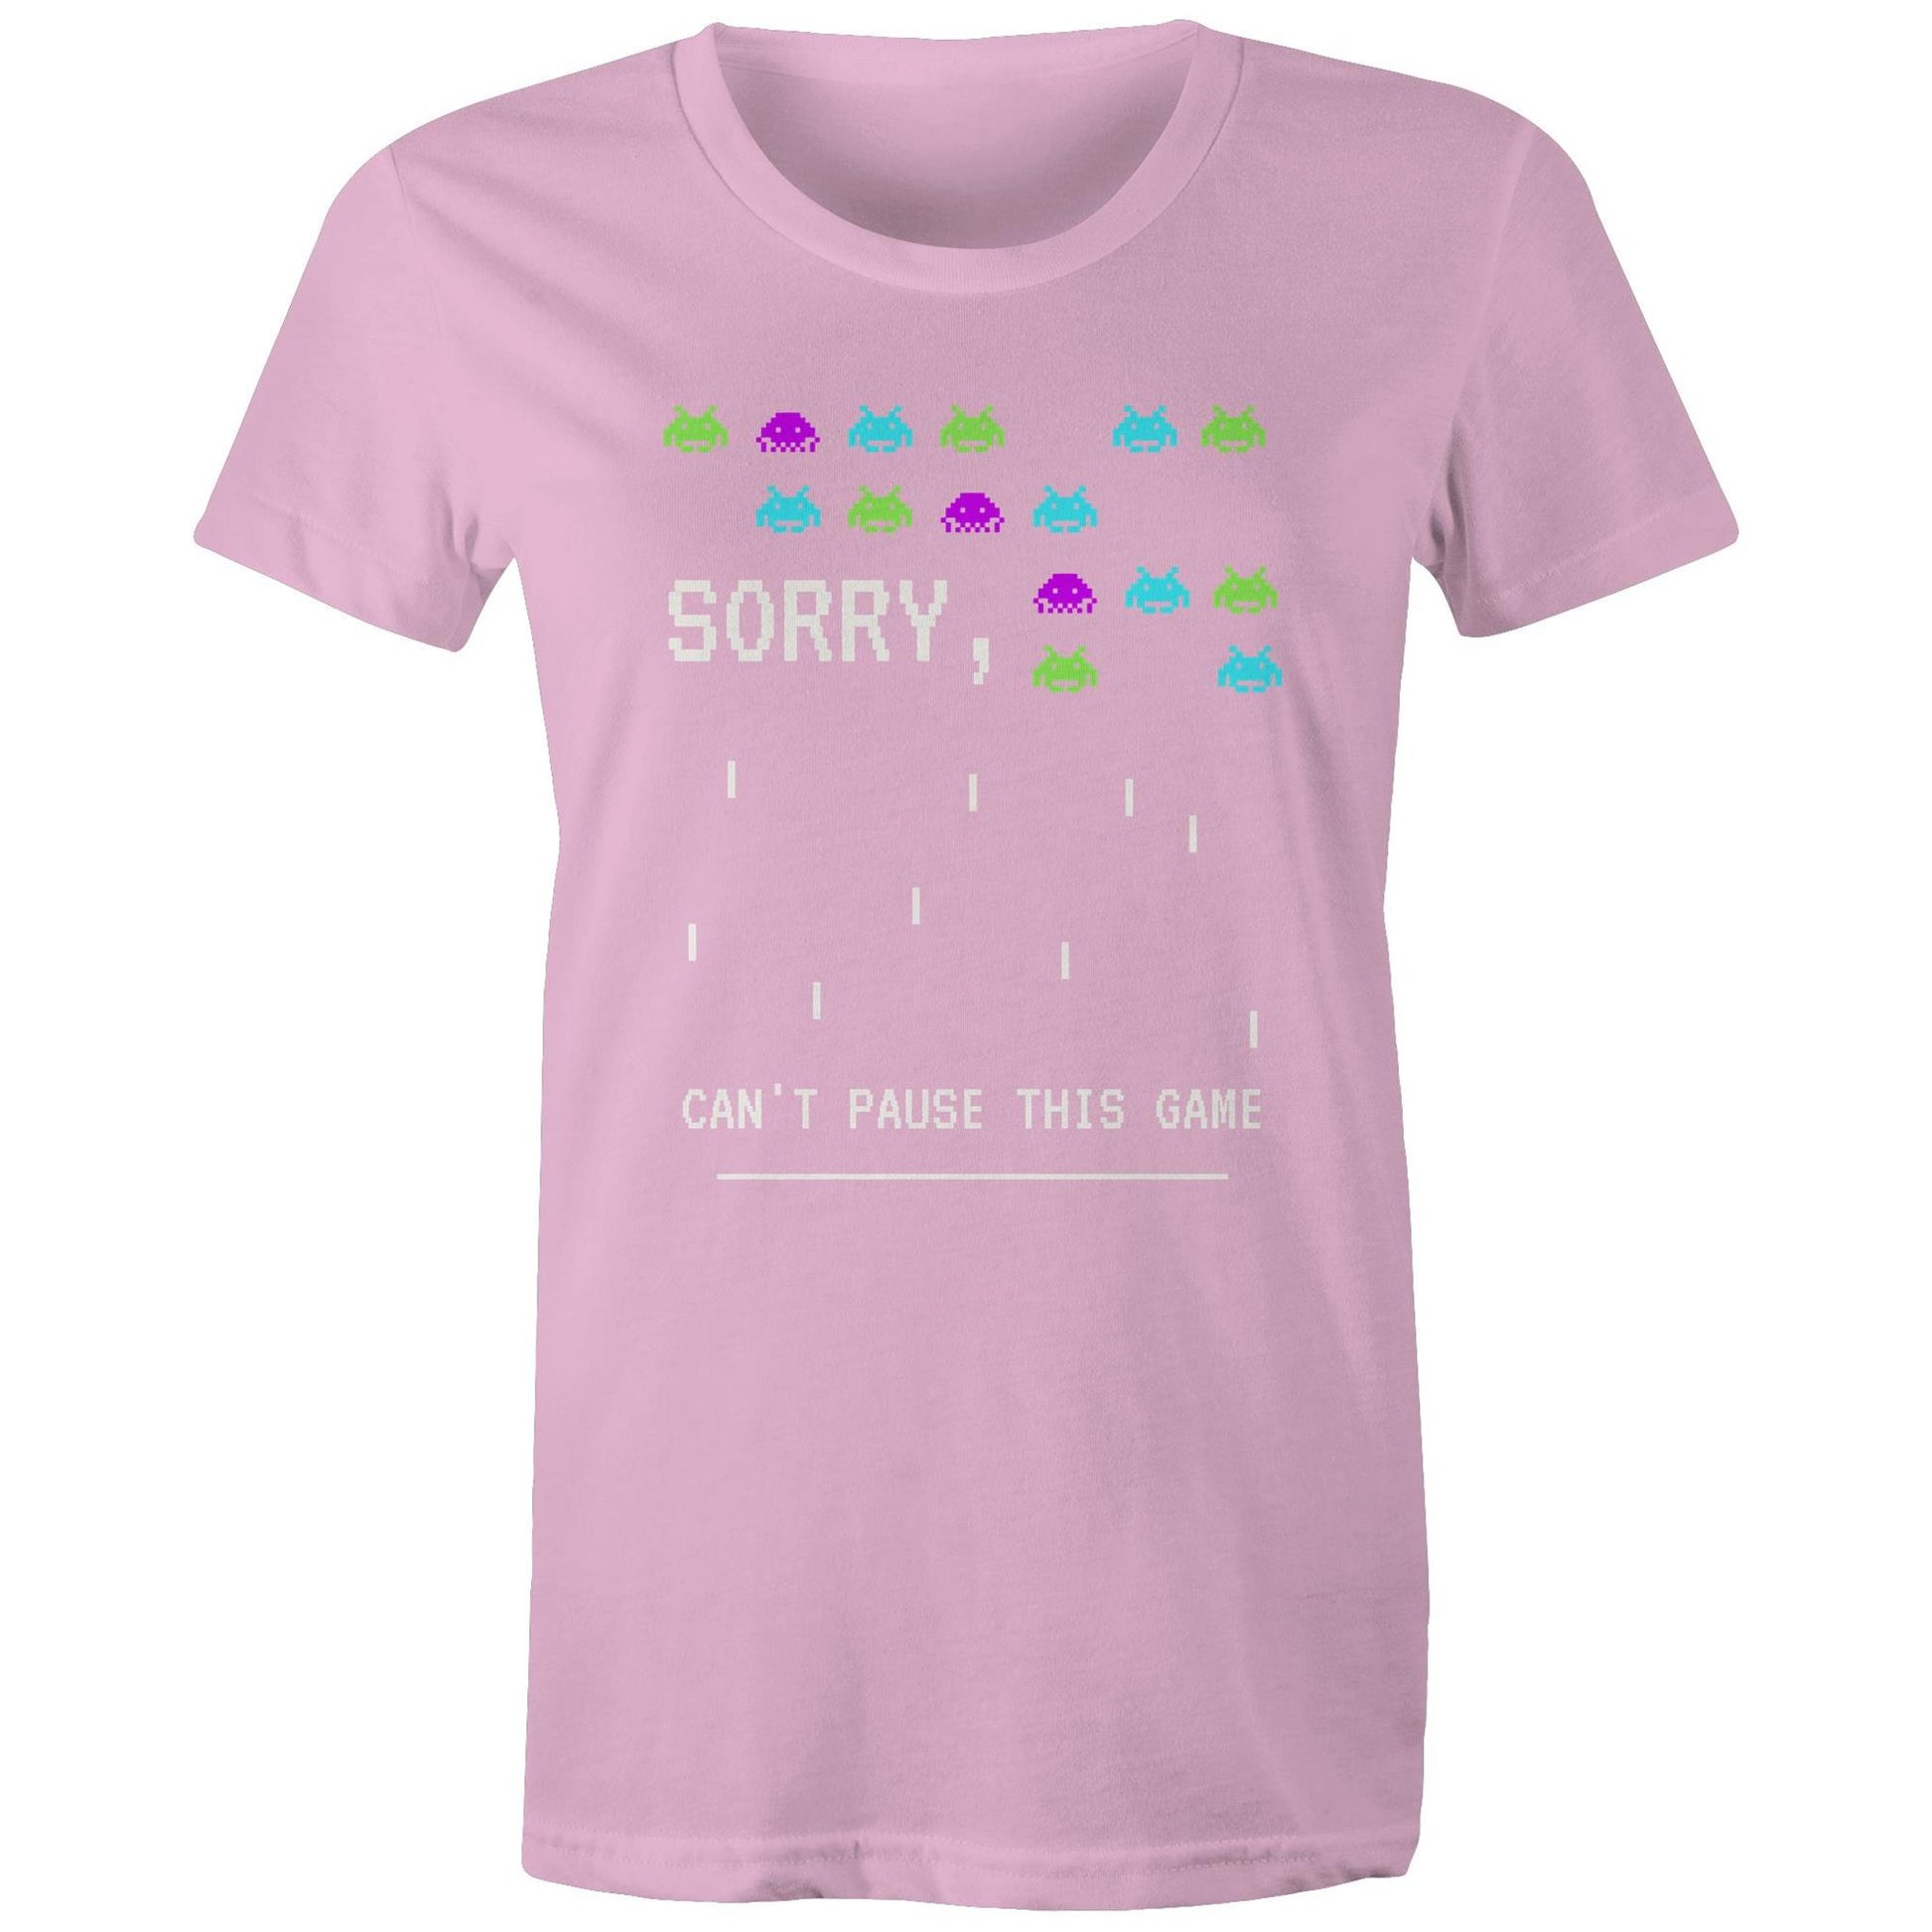 Sorry, Can't Pause This Game - Womens T-shirt Pink Womens T-shirt Games